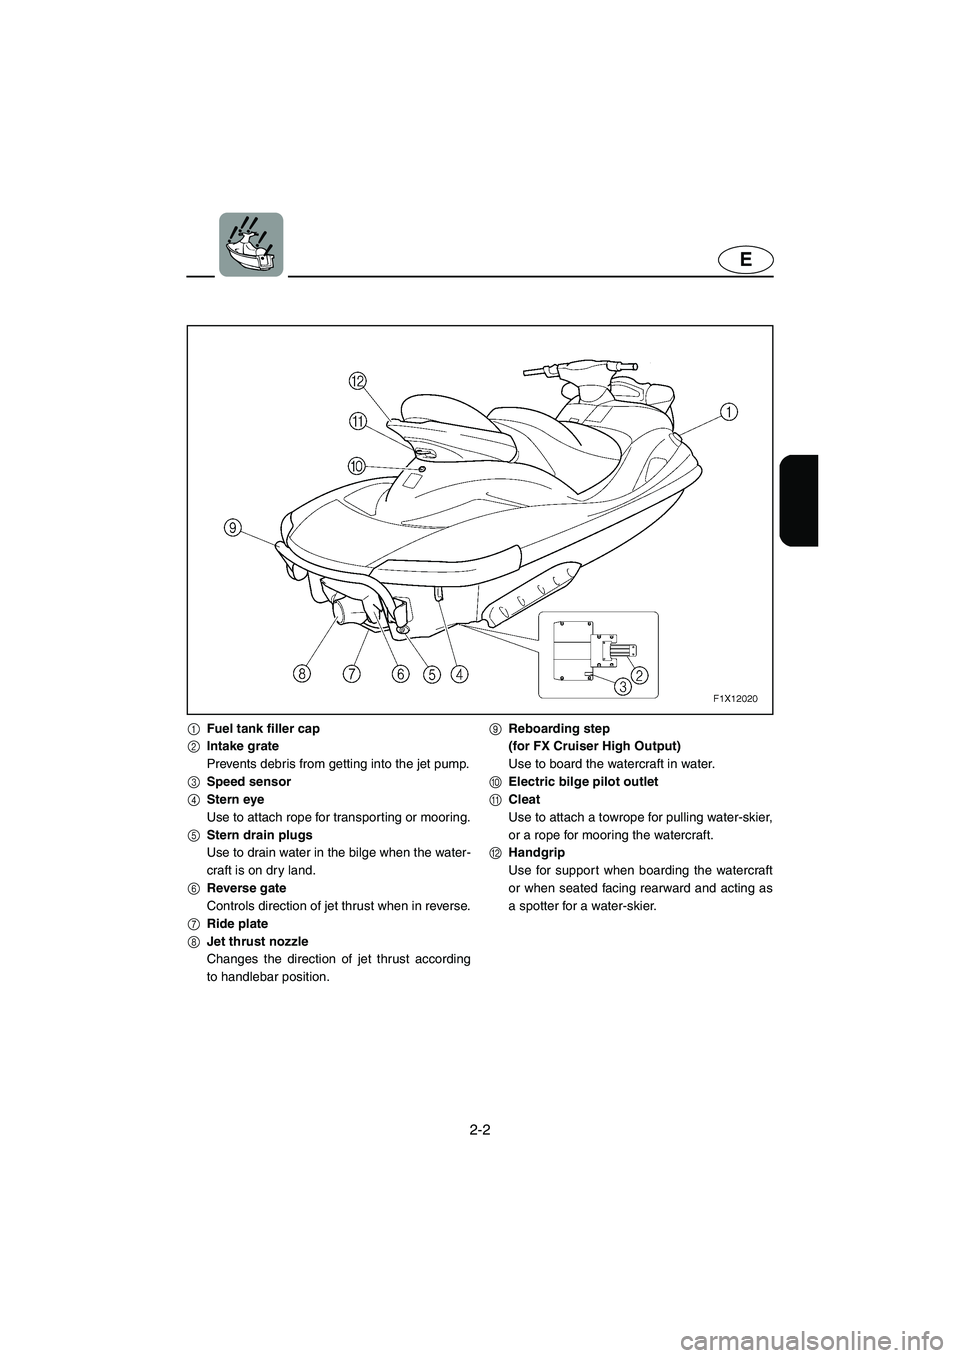 YAMAHA FX HO 2006 Owners Guide 2-2
E
1Fuel tank filler cap
2Intake grate
Prevents debris from getting into the jet pump.
3Speed sensor
4Stern eye
Use to attach rope for transporting or mooring.
5Stern drain plugs
Use to drain water